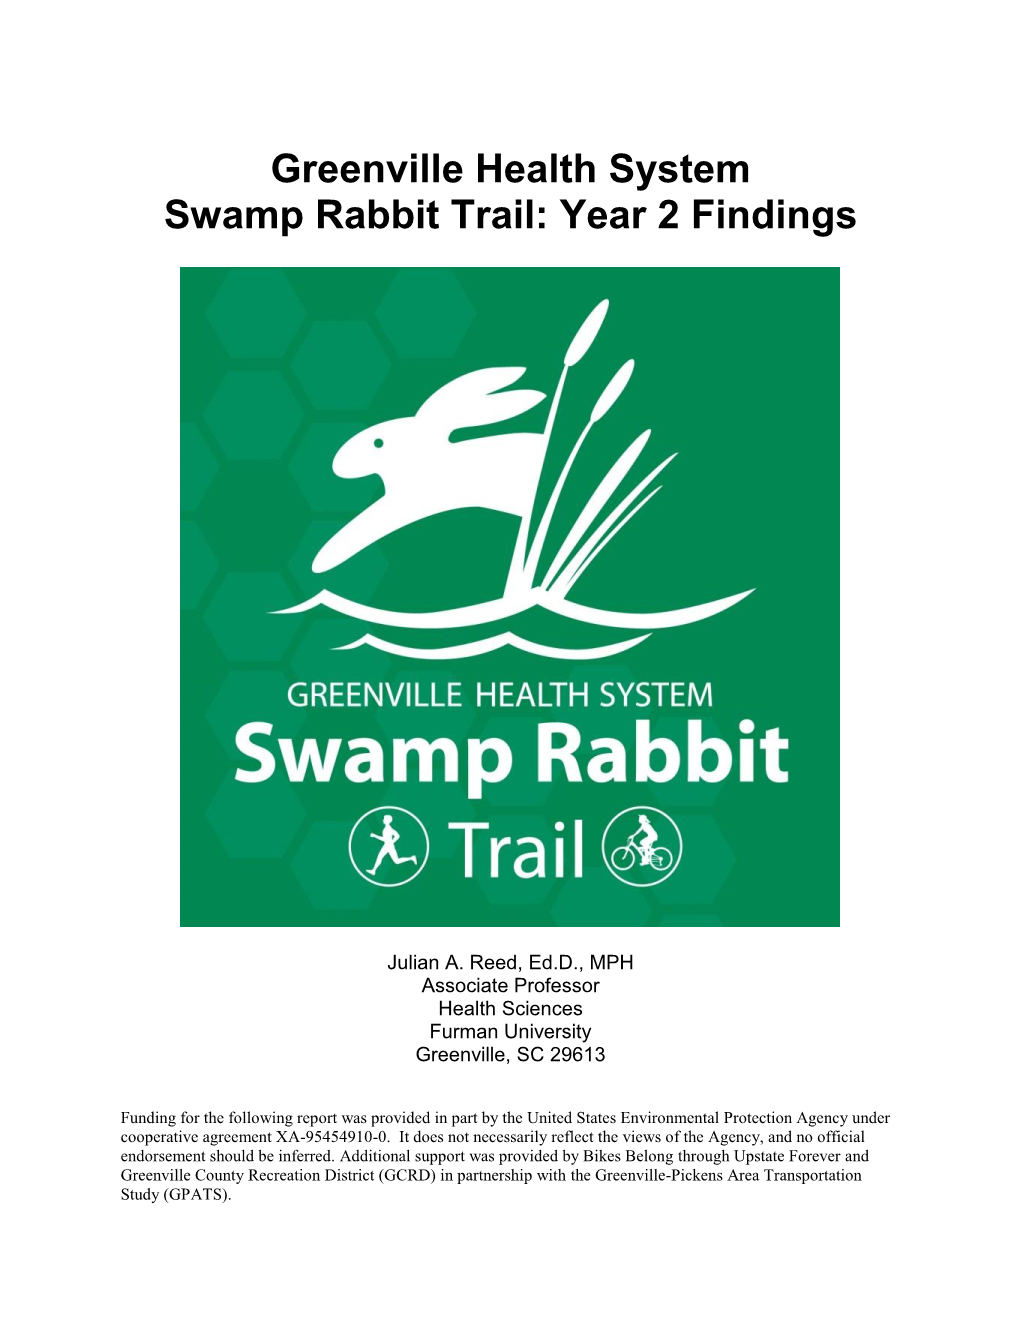 Greenville Health System Swamp Rabbit Trail: Year 2 Findings